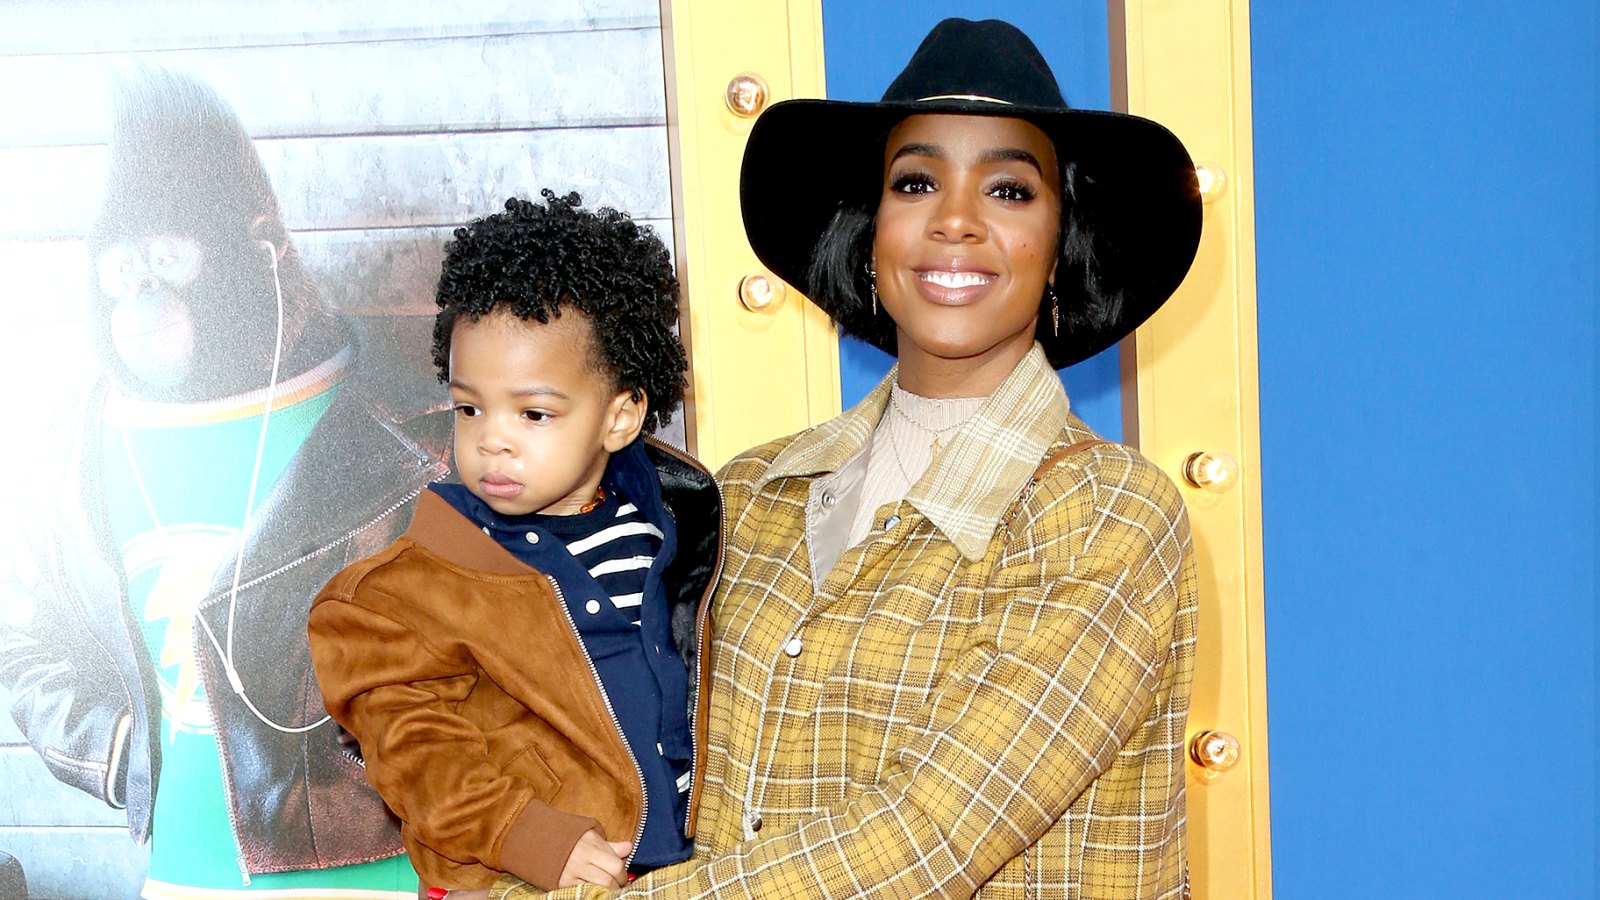 Kelly Rowland and Titan Rowland attend the premiere Of Universal Pictures' "Sing" on December 3, 2016 in Los Angeles, California.